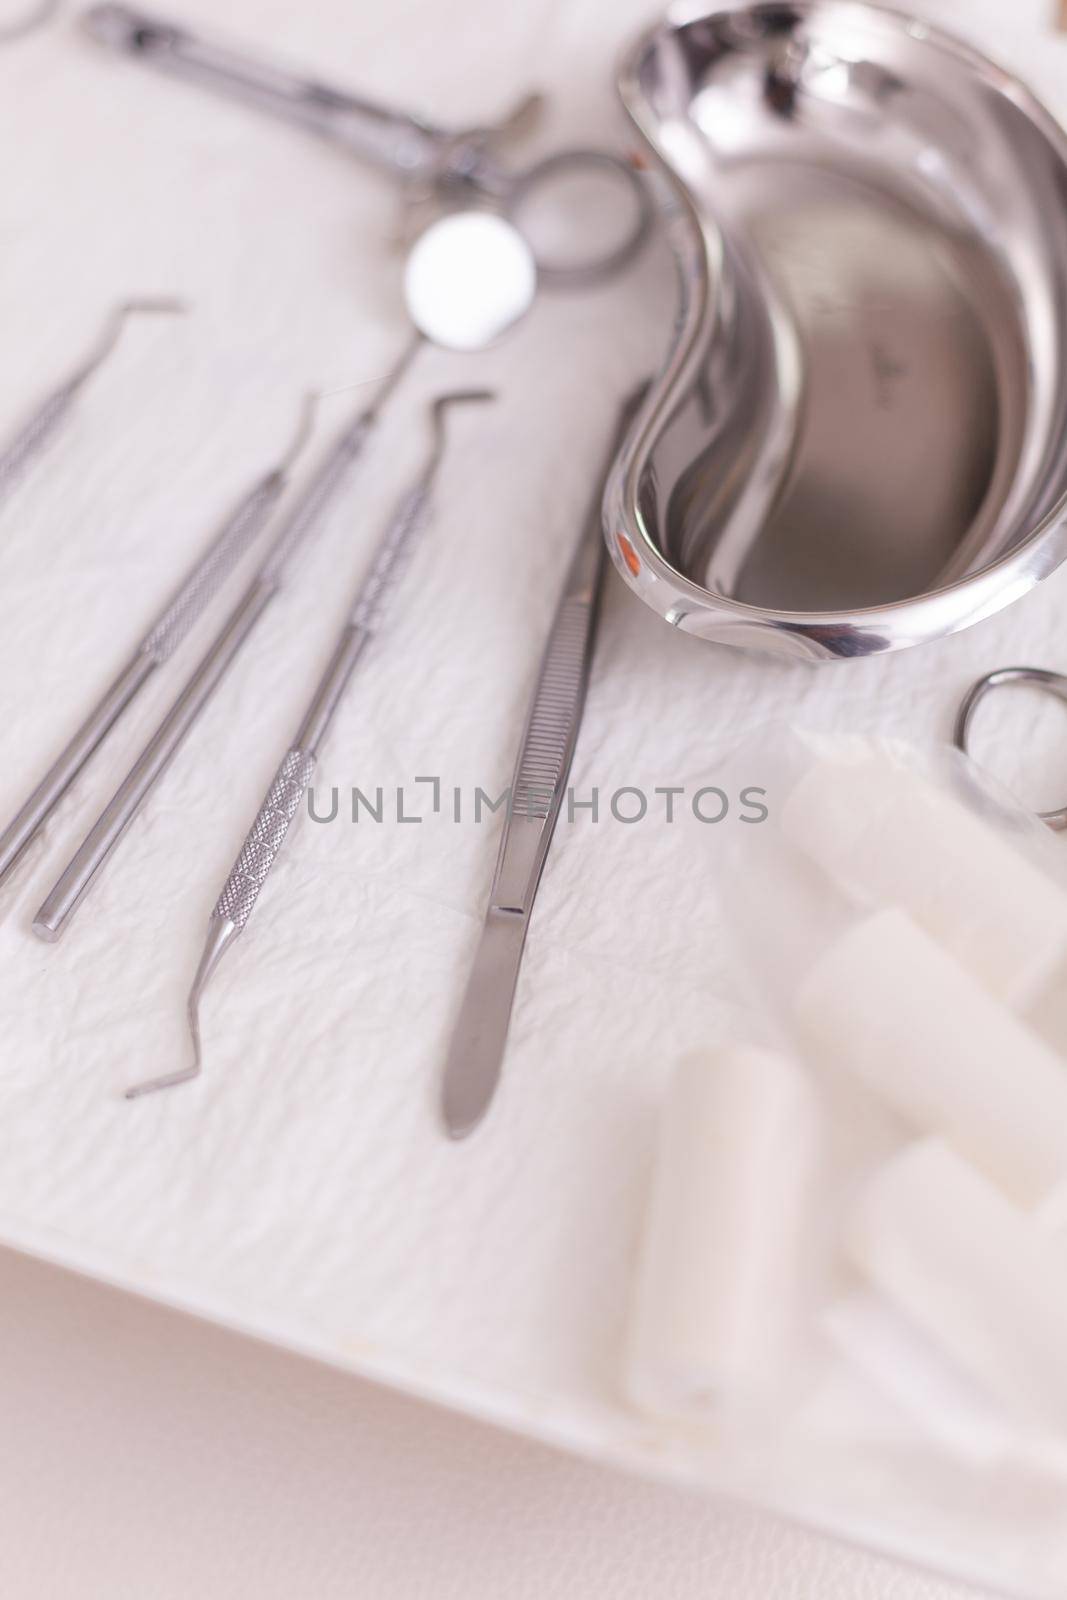 Close up of oral dental instruments ready for dentistry teeth surgery in stomatology hospital room. Modern office equipped with professional medical tooth tools ready for dental healthcare